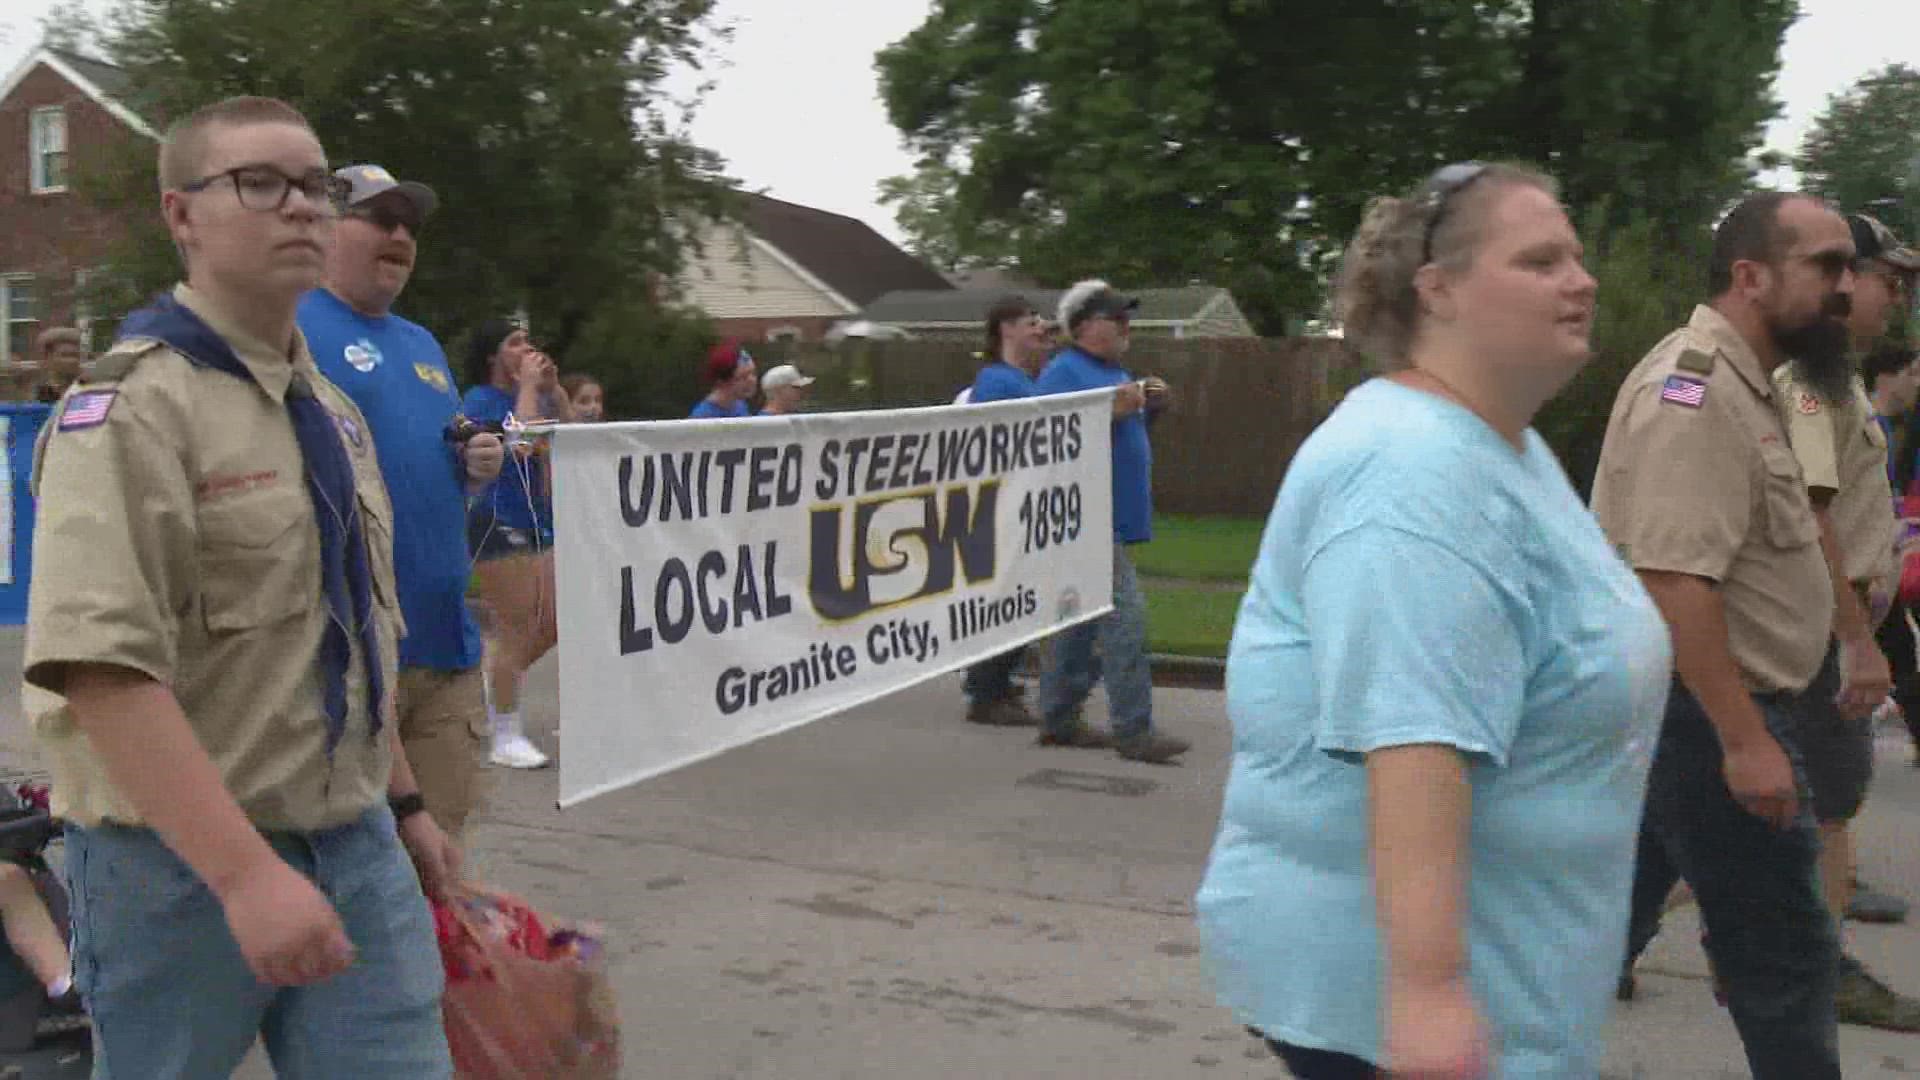 Residents of Granite City marched in a Labor Day Parade to support local workers. The steelworkers in the area also voiced their frustrations during the parade.